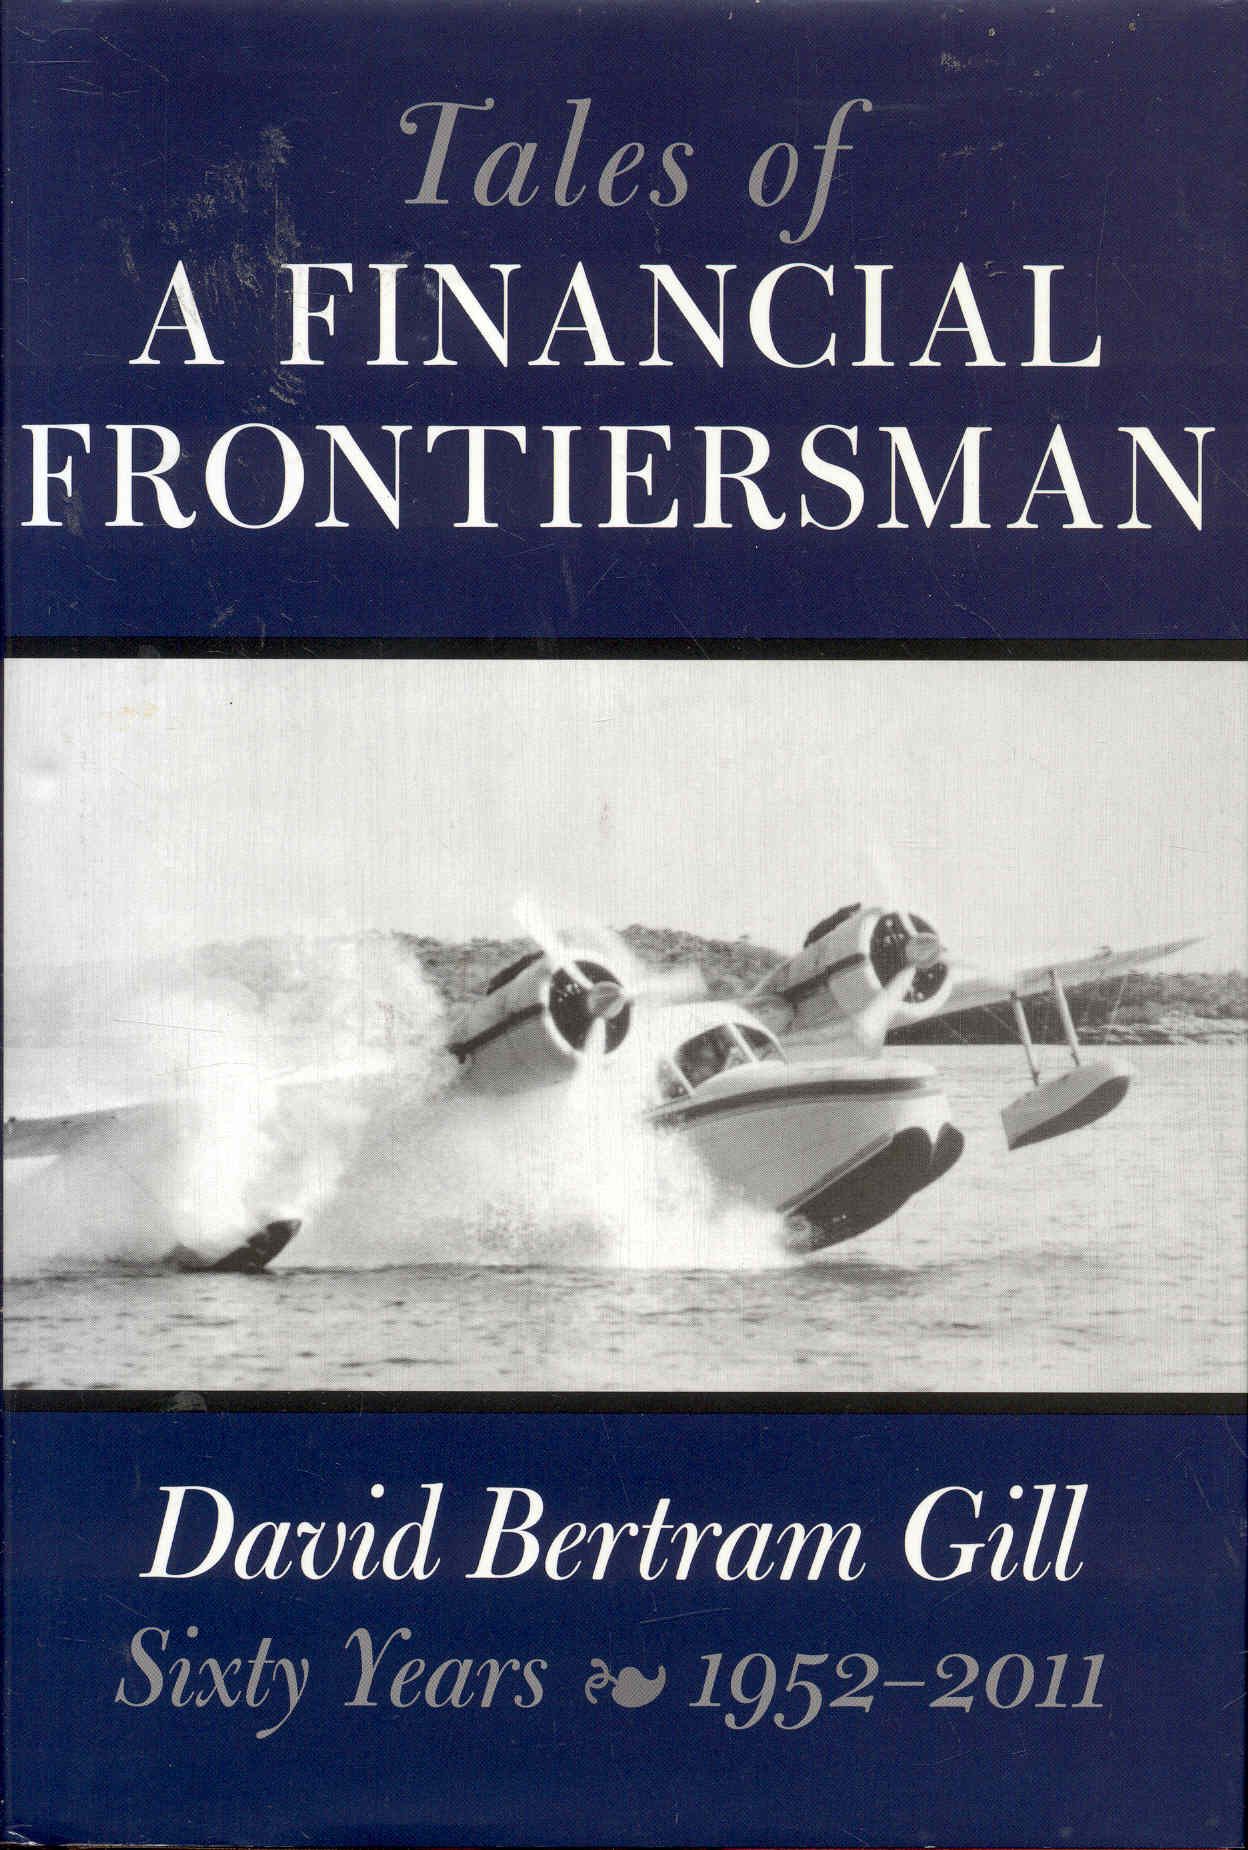 Image for Tales of a Financial Frontiersman (Sixty Years: 1952-2011)